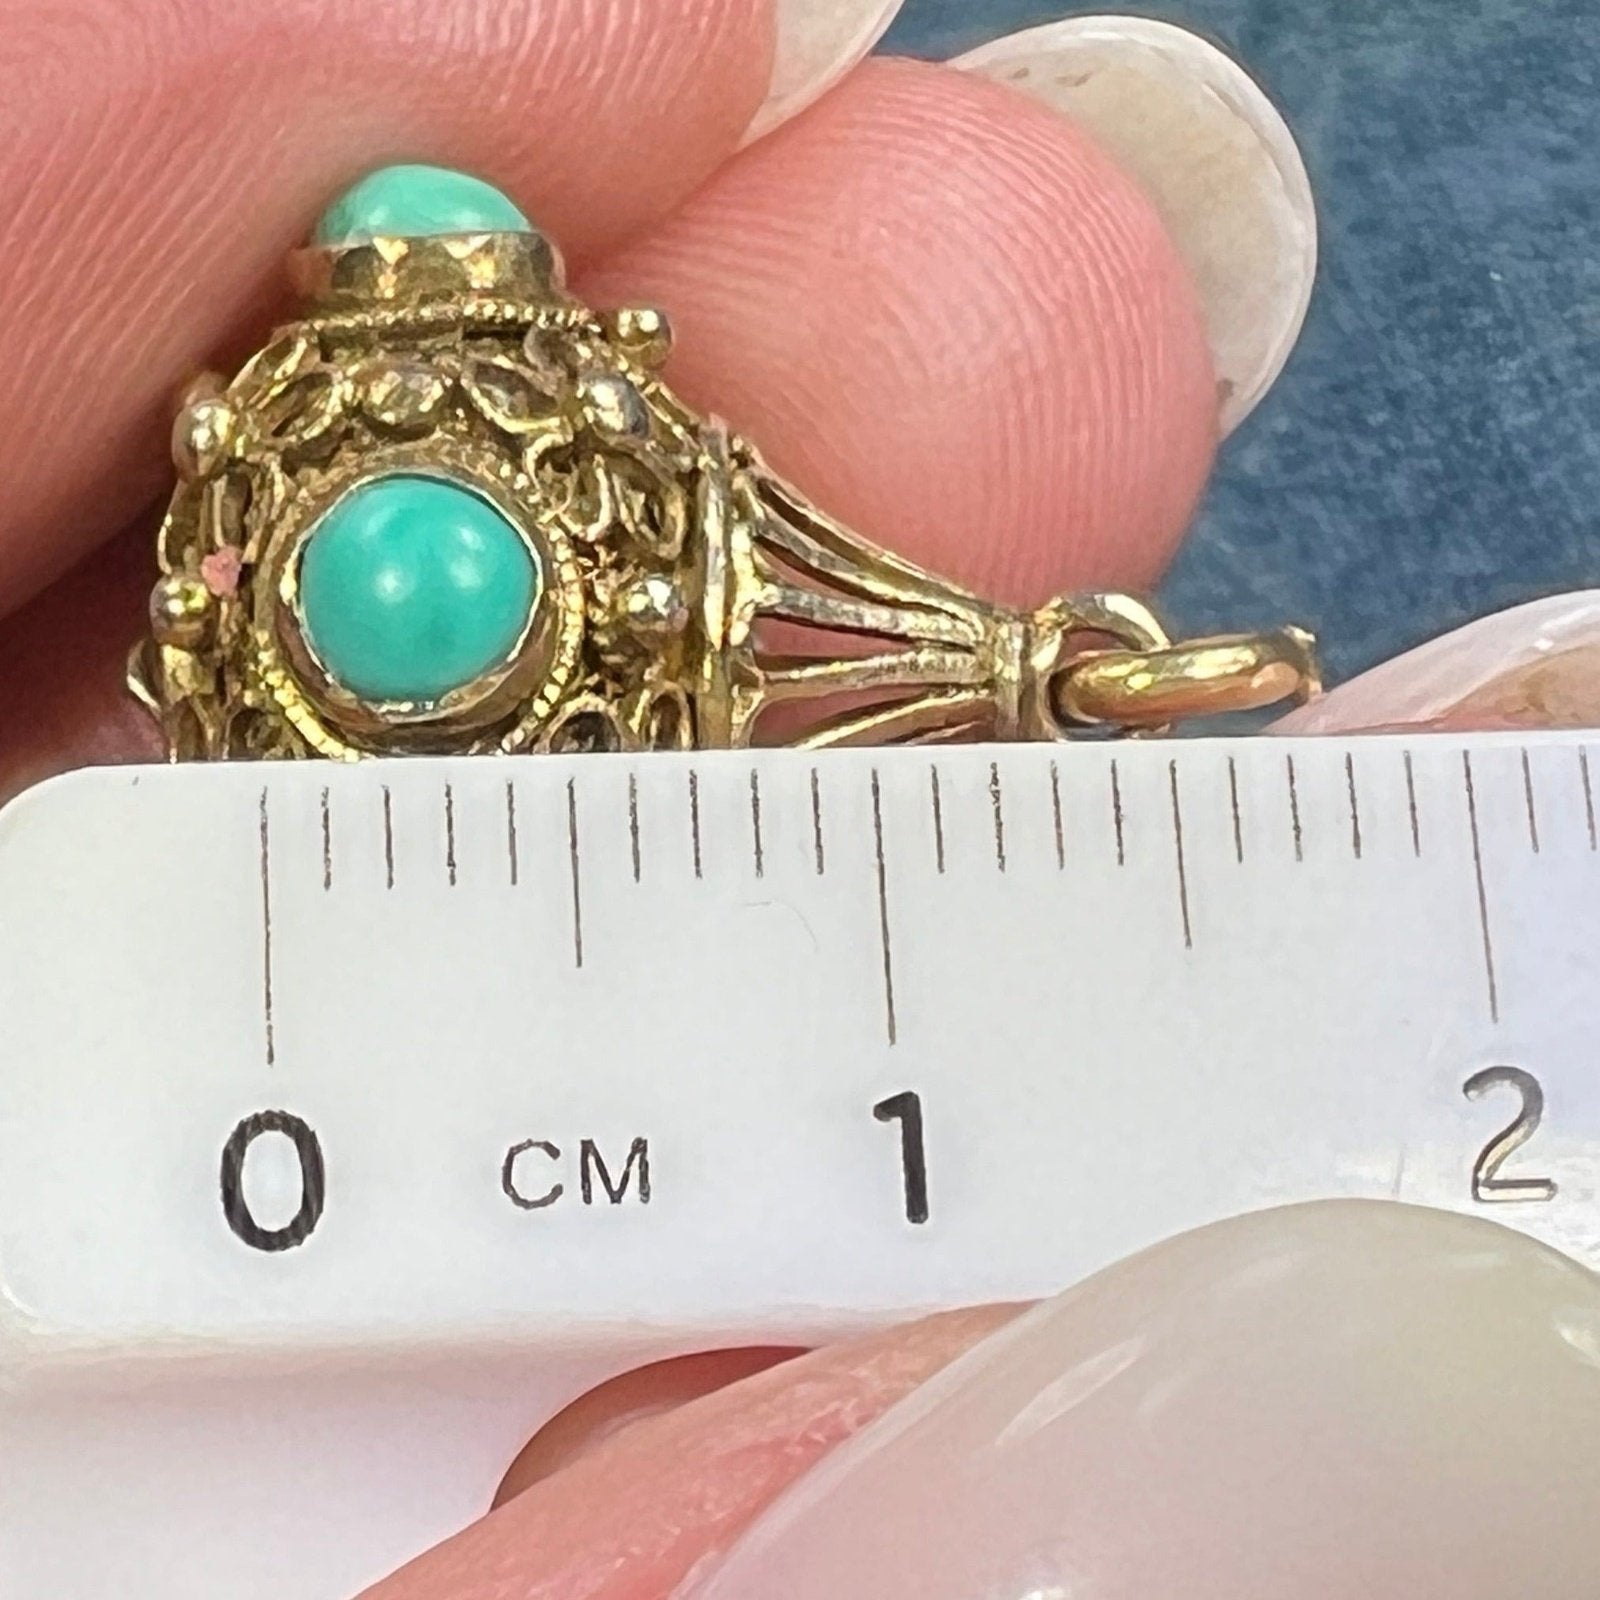 10k Gold Turquoise Teardrop Cantinelle Watch Fob Pendant. Victorian